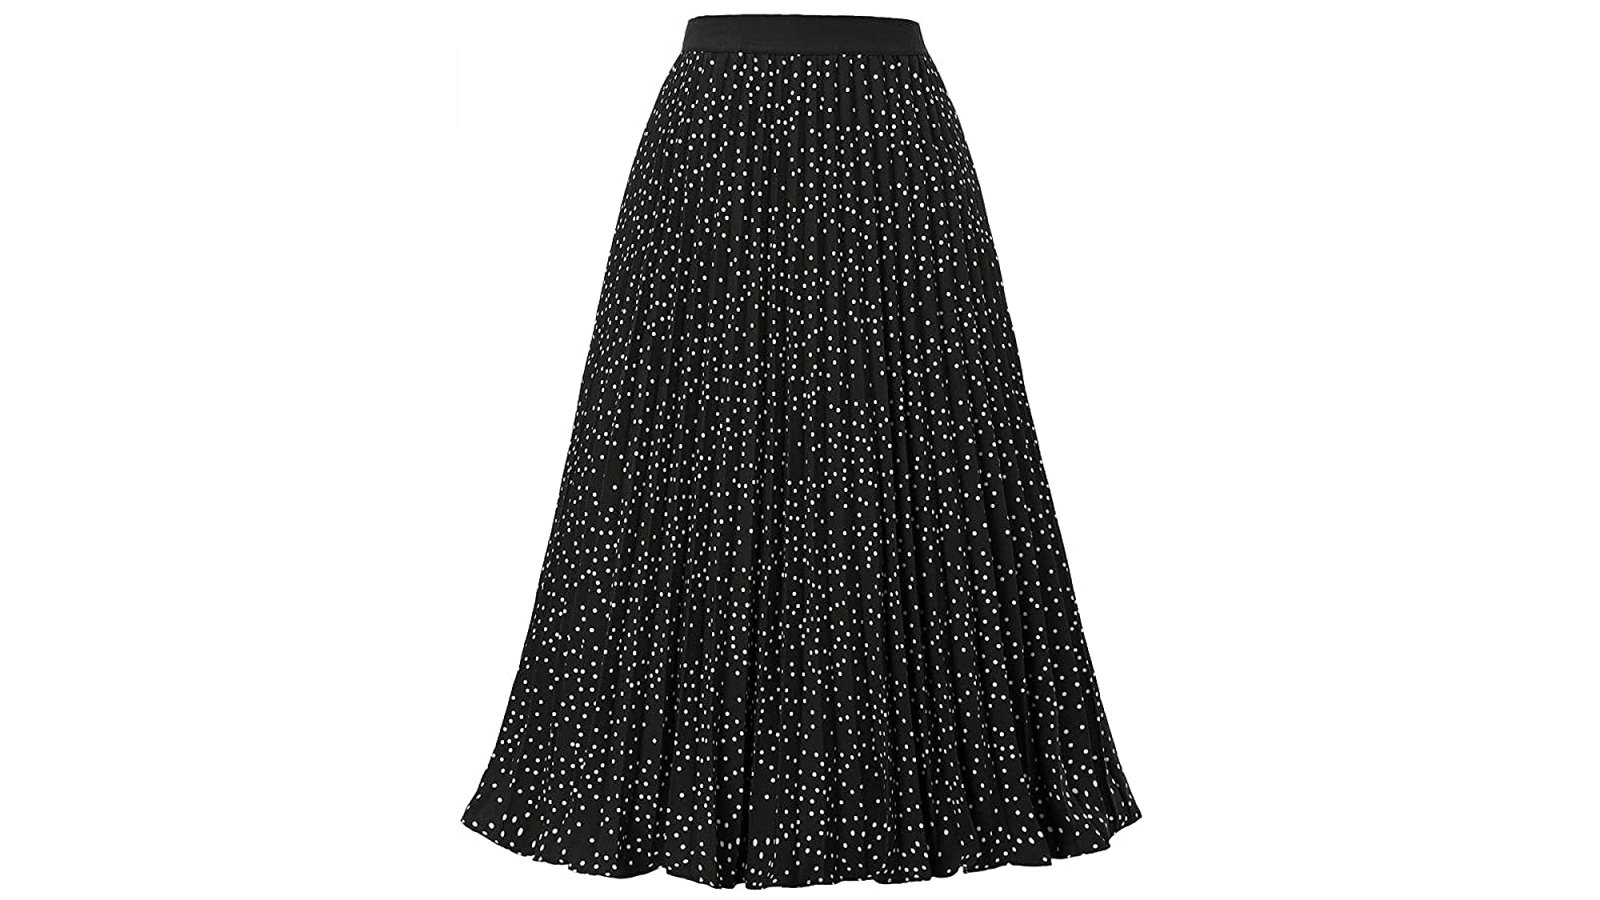 Kasin Pleated Skirt Can Be in So Many Fun Ways